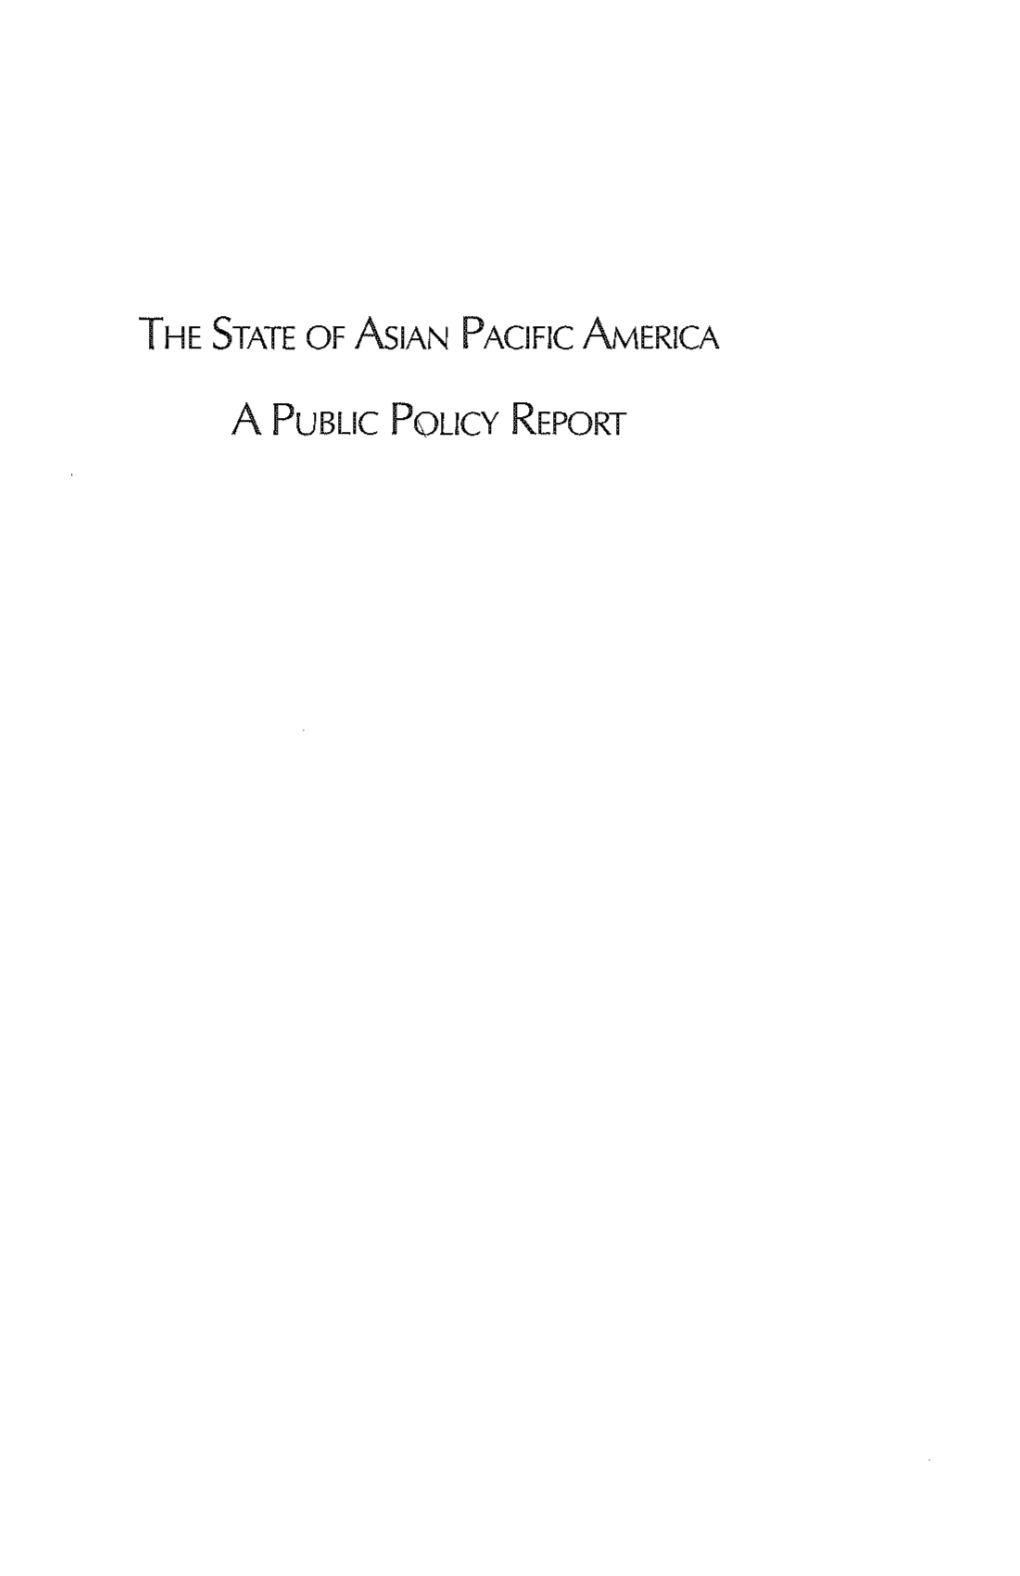 THE STATE of Asian PACIFIC AMERICA a Pusuc Poucv REPORT